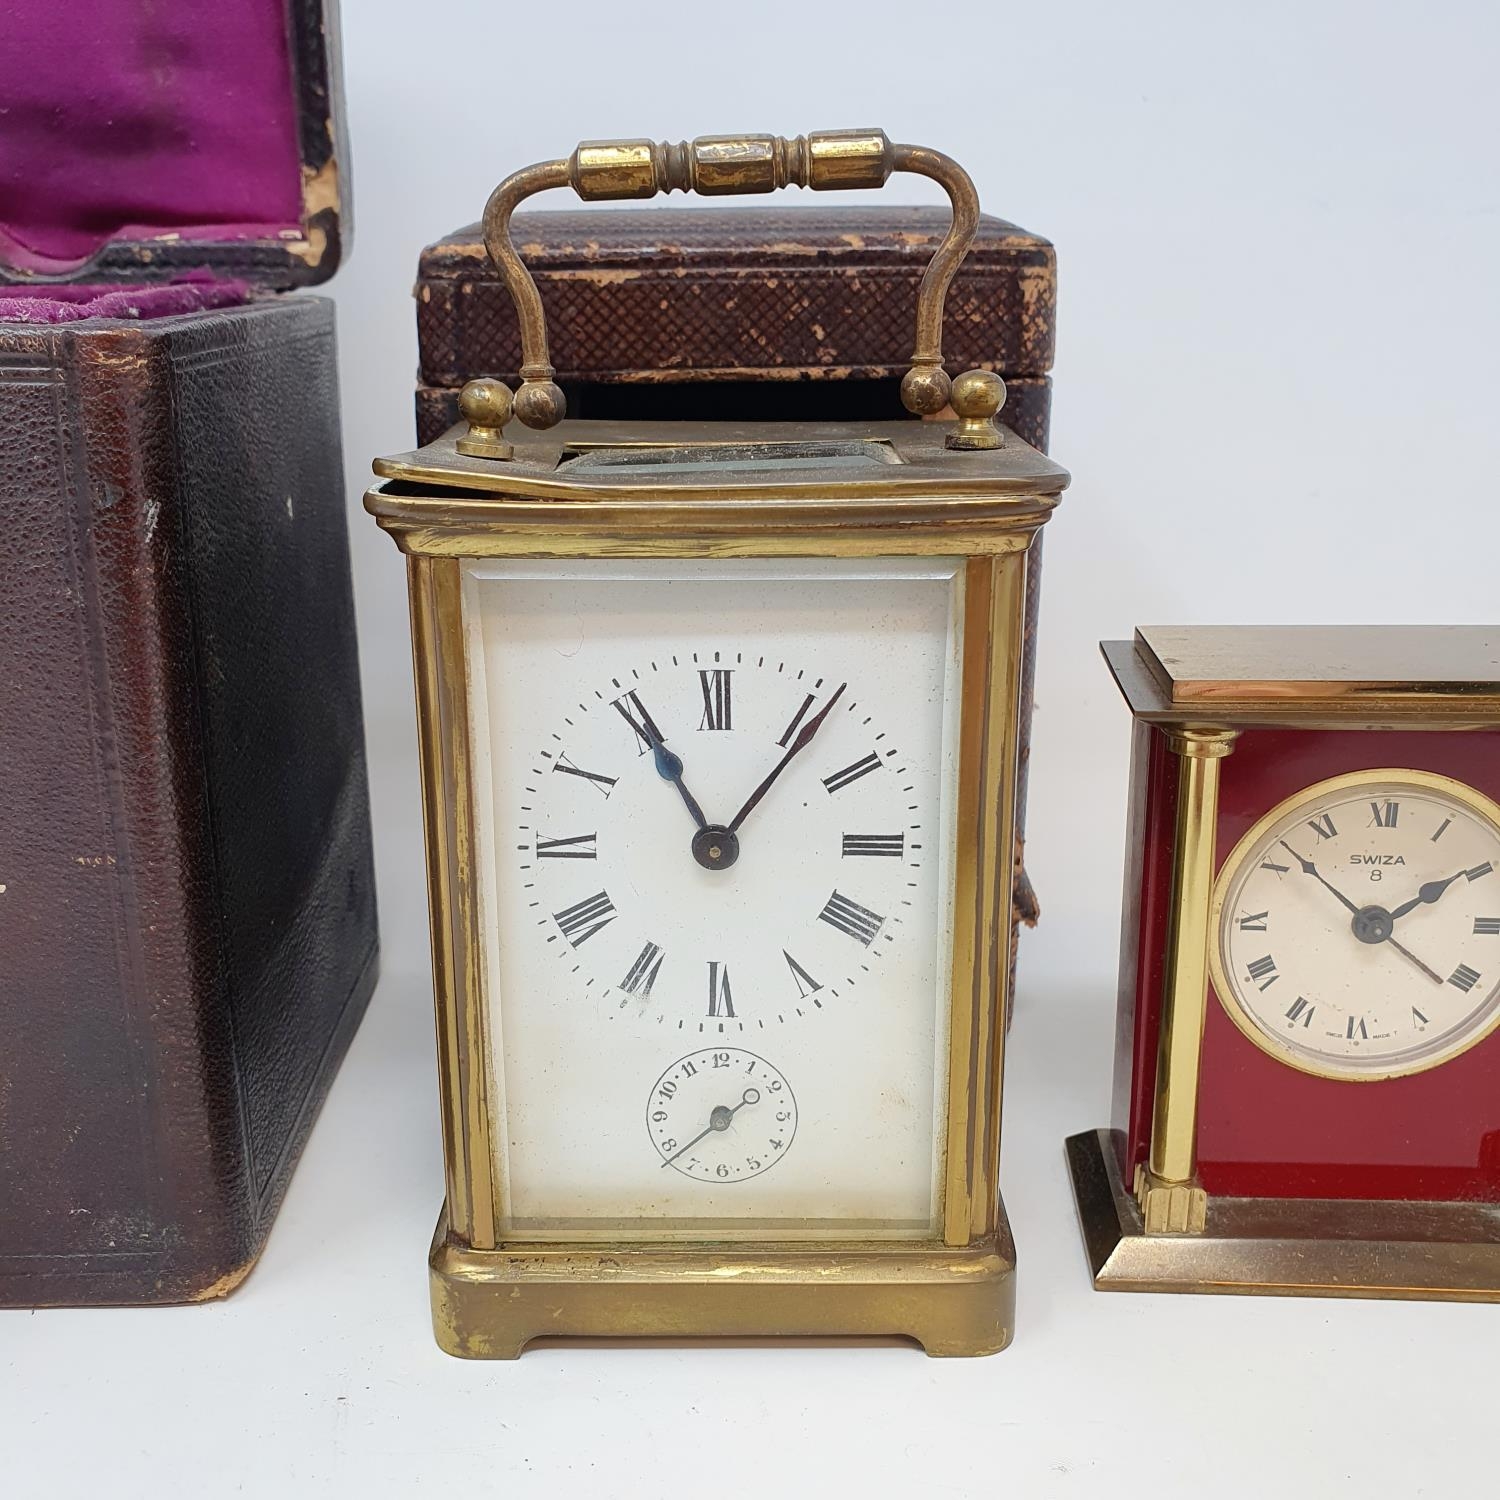 A carriage clock, the 5.5 cm wide enamel dial with Roman numerals, and a subsidiary alarm dial, in a